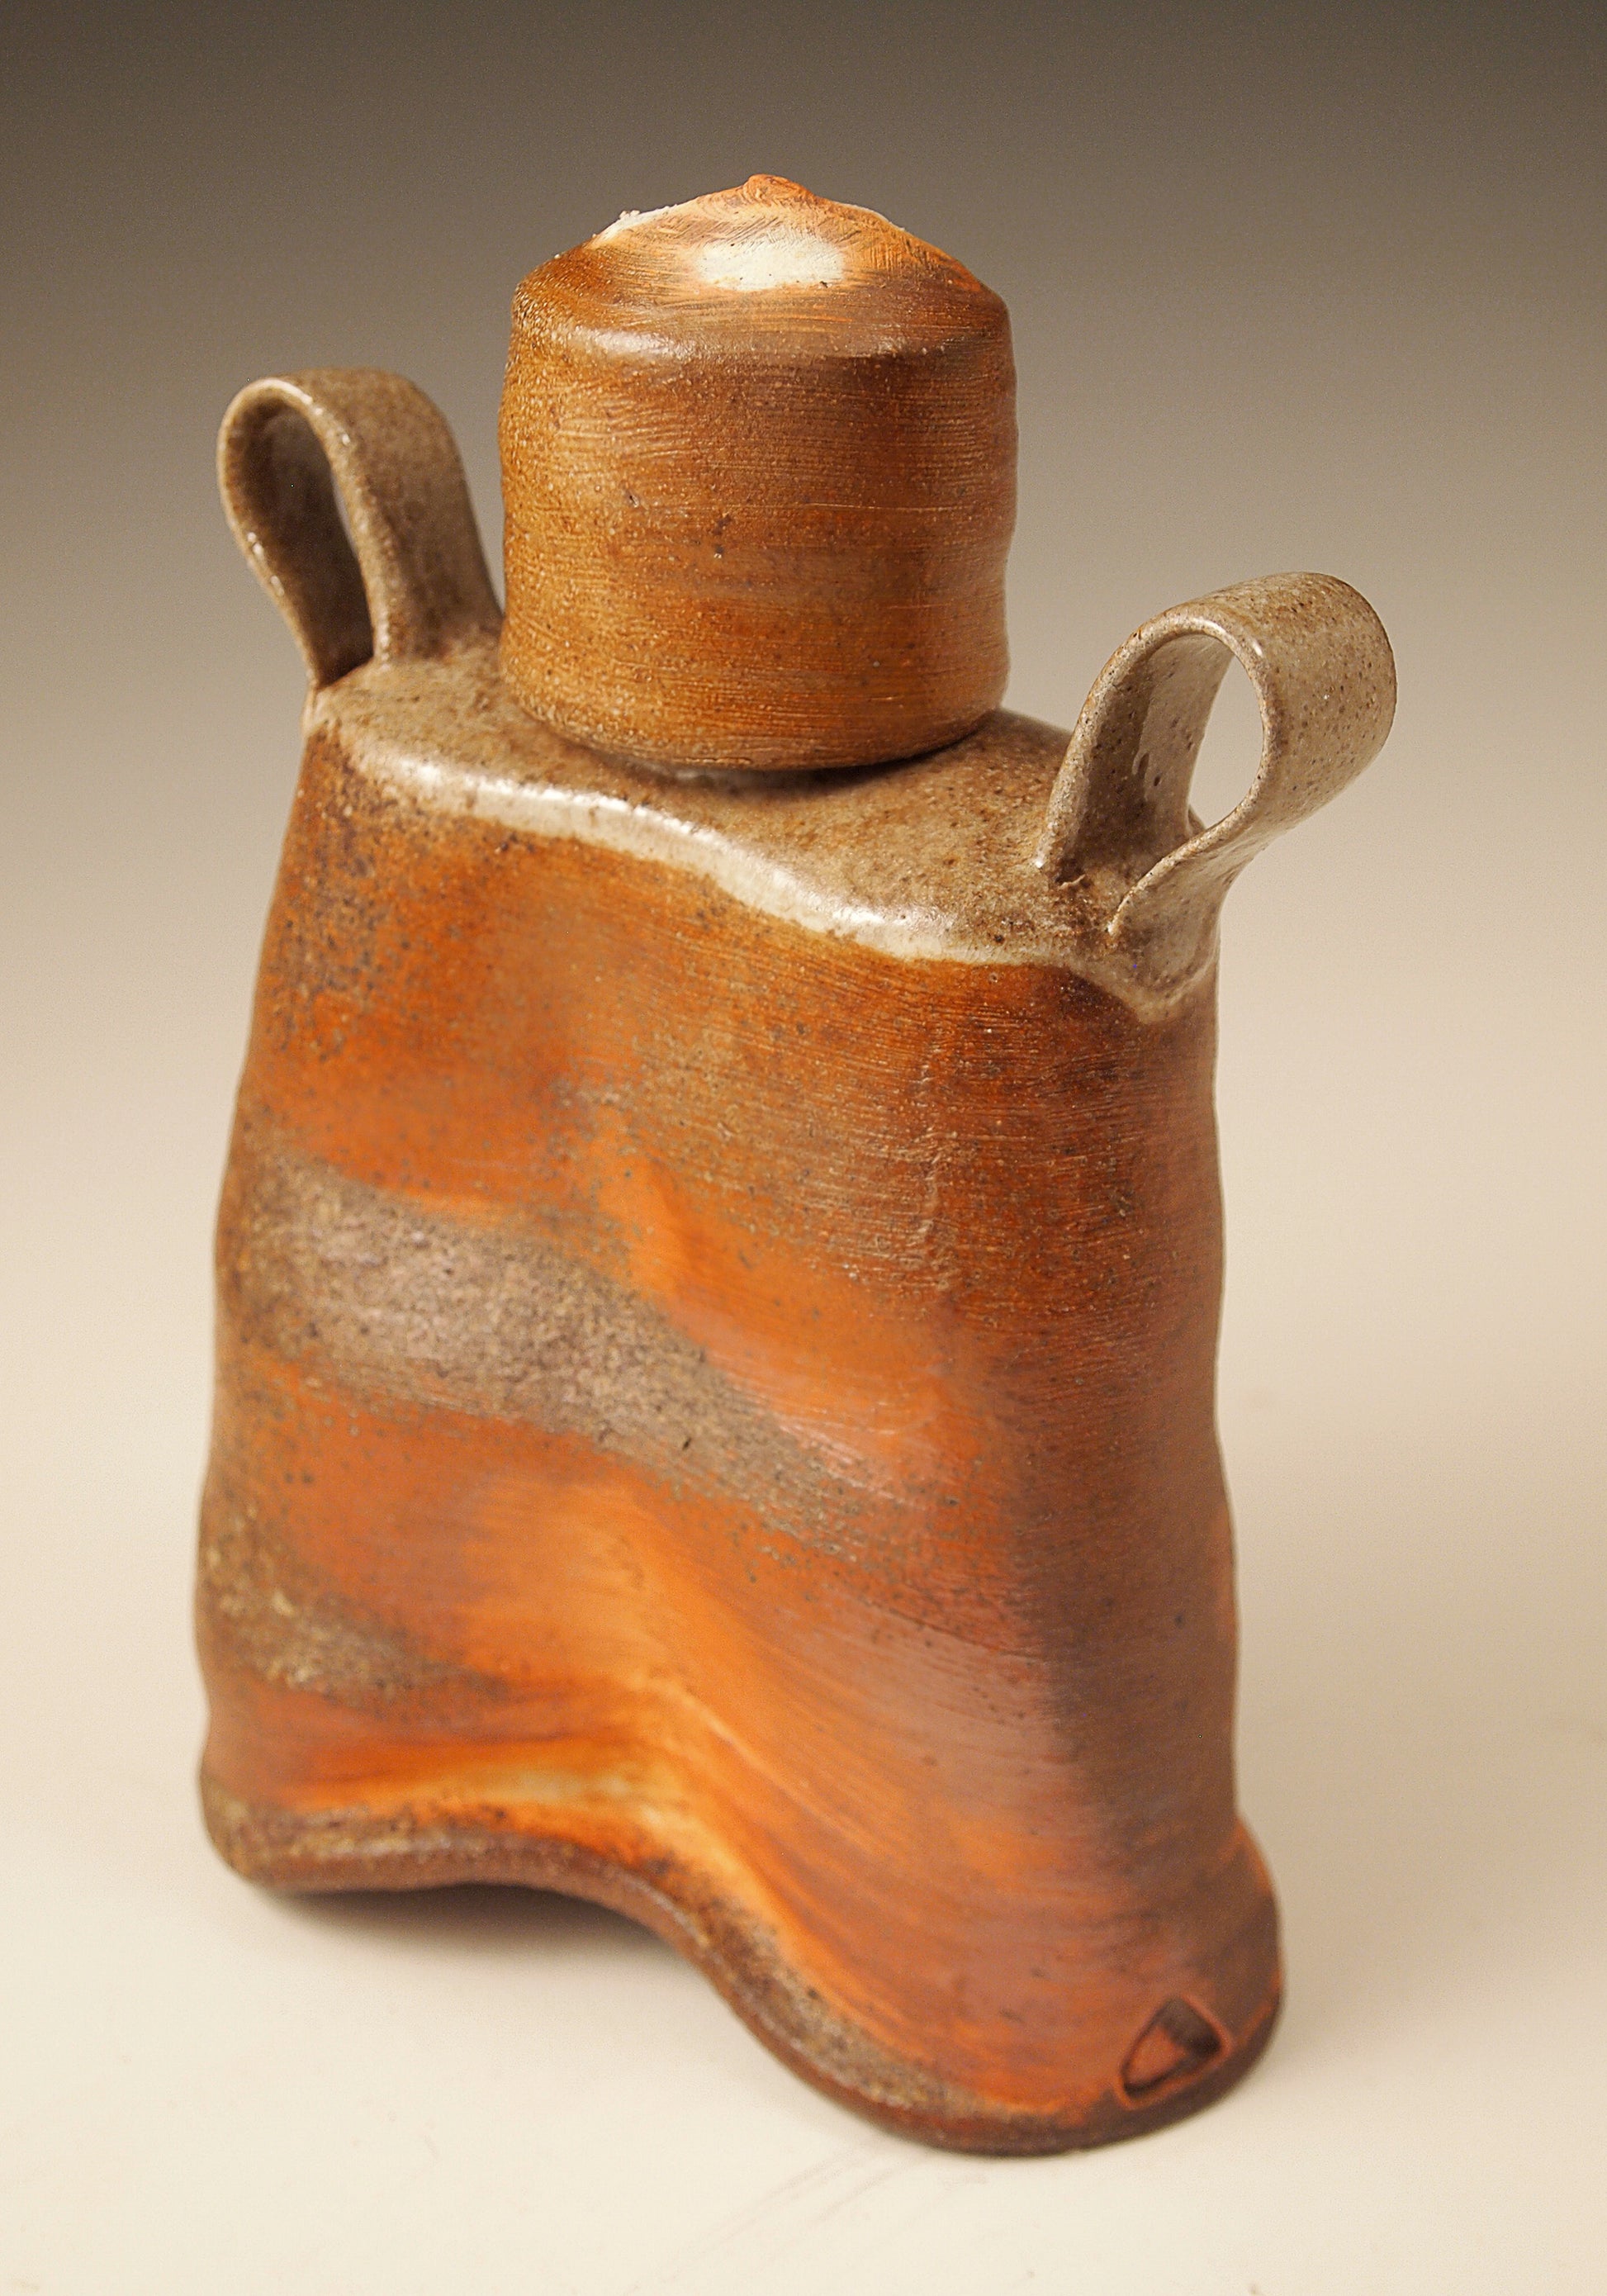 Small, handmade ceramic whiskey flask.  Wood-fired Stoneware.  Bright orange and brown slip exterior.  Rustic design.  View from an angle.